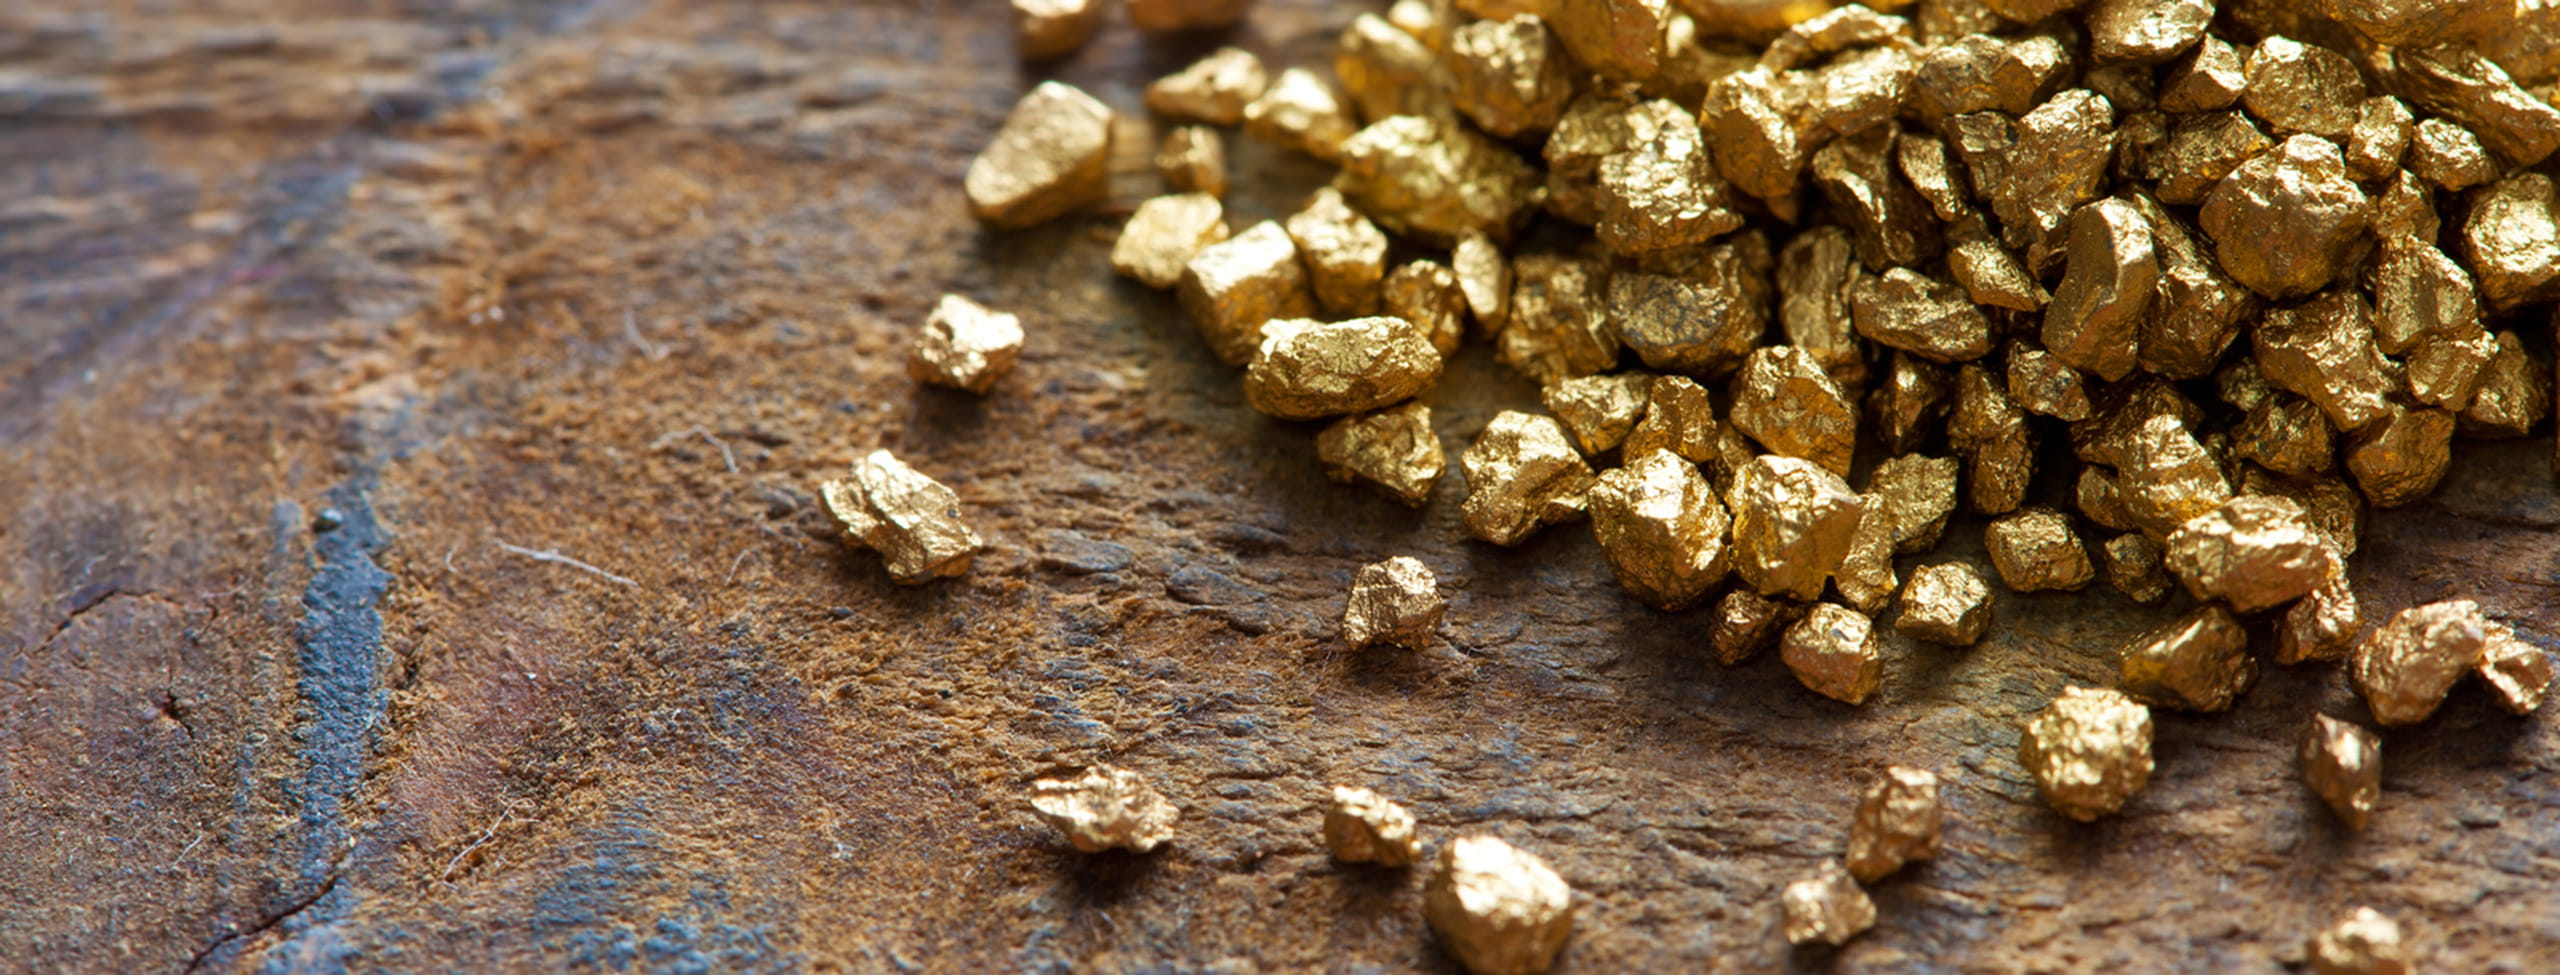 Gold nuggets on wooden work table